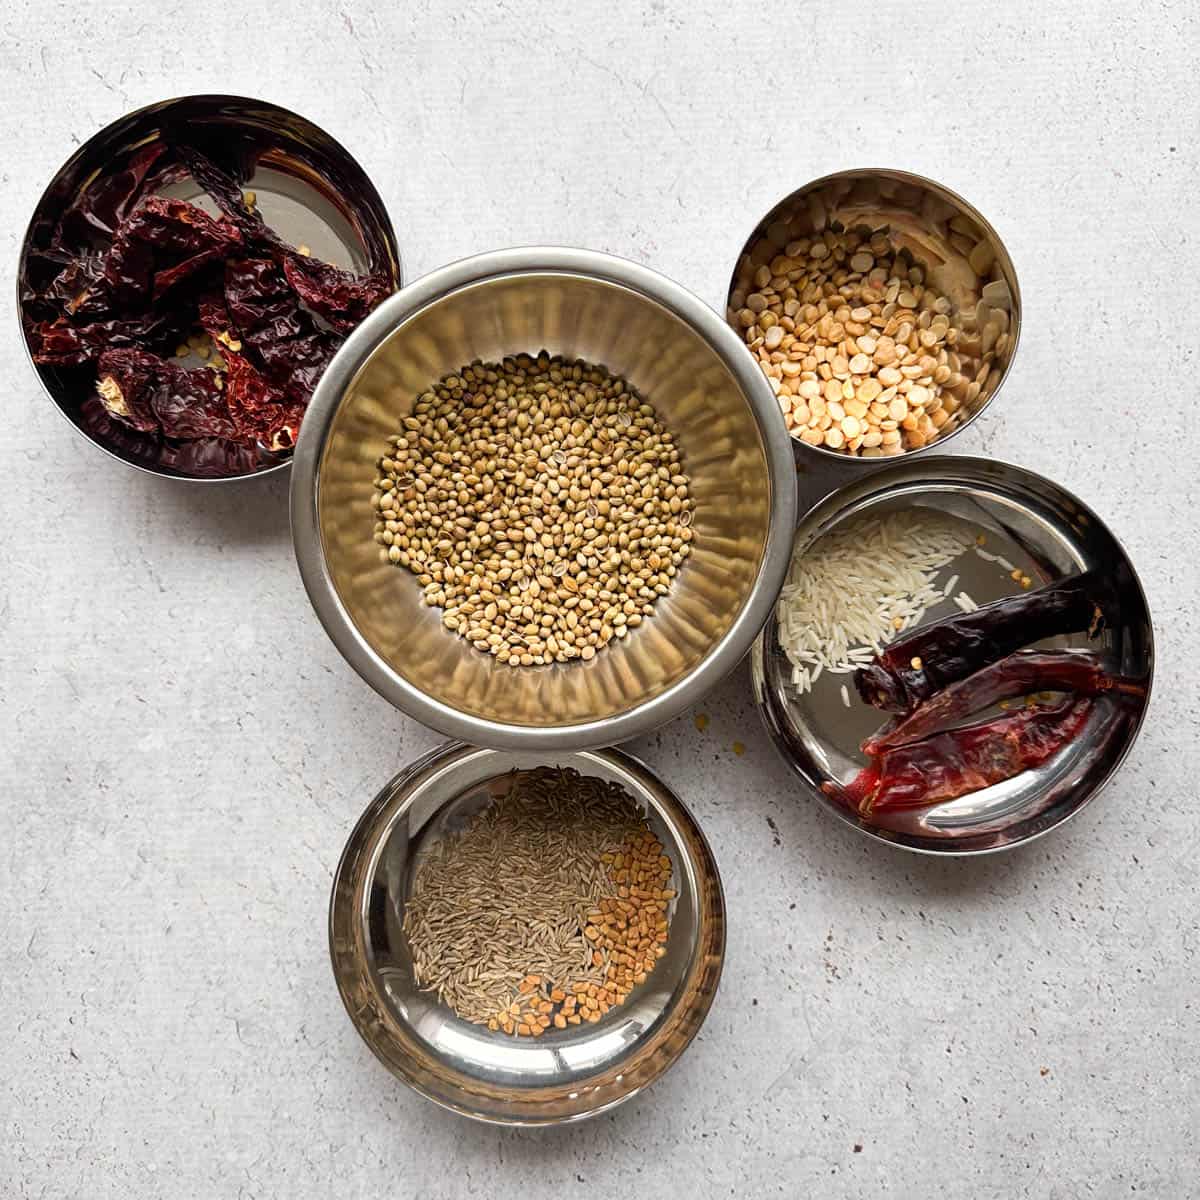 Small bowls that contain individual ingredients to make sambar podi or sambar spice blend. One bowl with dried Kashmiri chili pepper, one bowl with chana dal, one bowl with raw white rice and Indian dried red chilis, a big bowl with corainder seeds, and the last bowl with cumin seeds and fenugreek seeds.